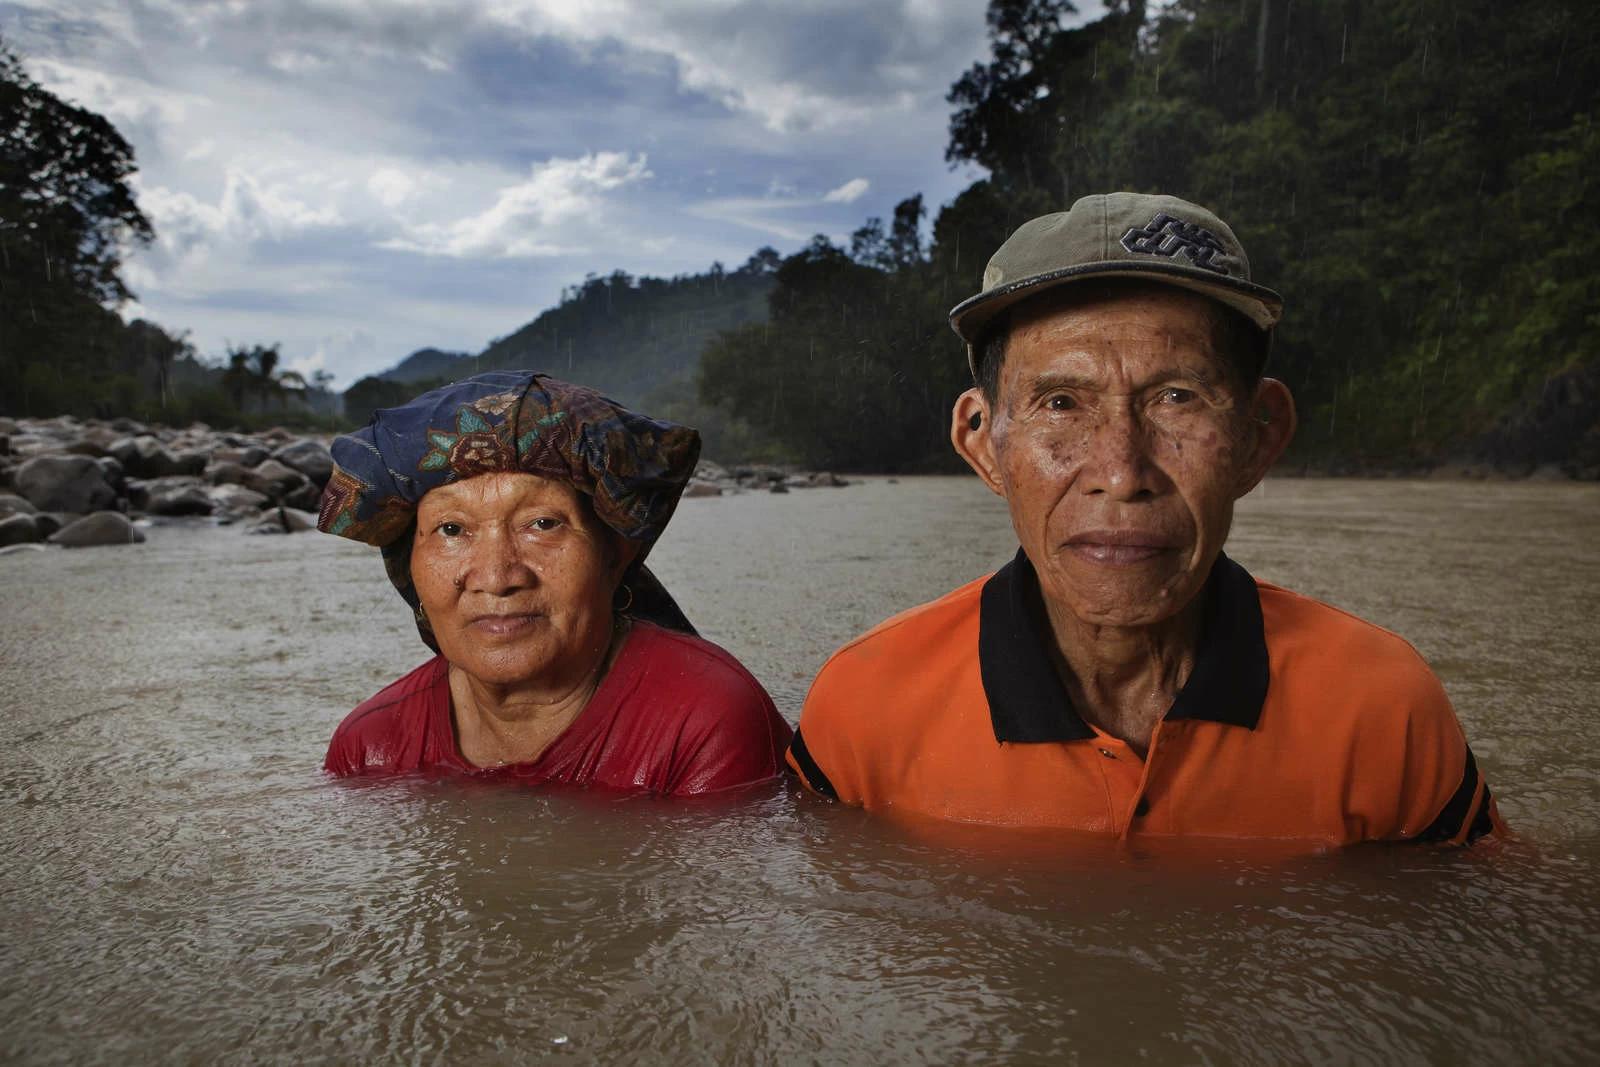 A Kelabit couple stand immersed in a river that passes through the village of Long Napir. A new dam project supported by the Malaysian government threatens to flood Long Napir and the surrounding forest areas which have been the homeland of the Kelabit and other tribal groups like the Penan since time immemorial. Photo and story credits to Yvan Cohen.